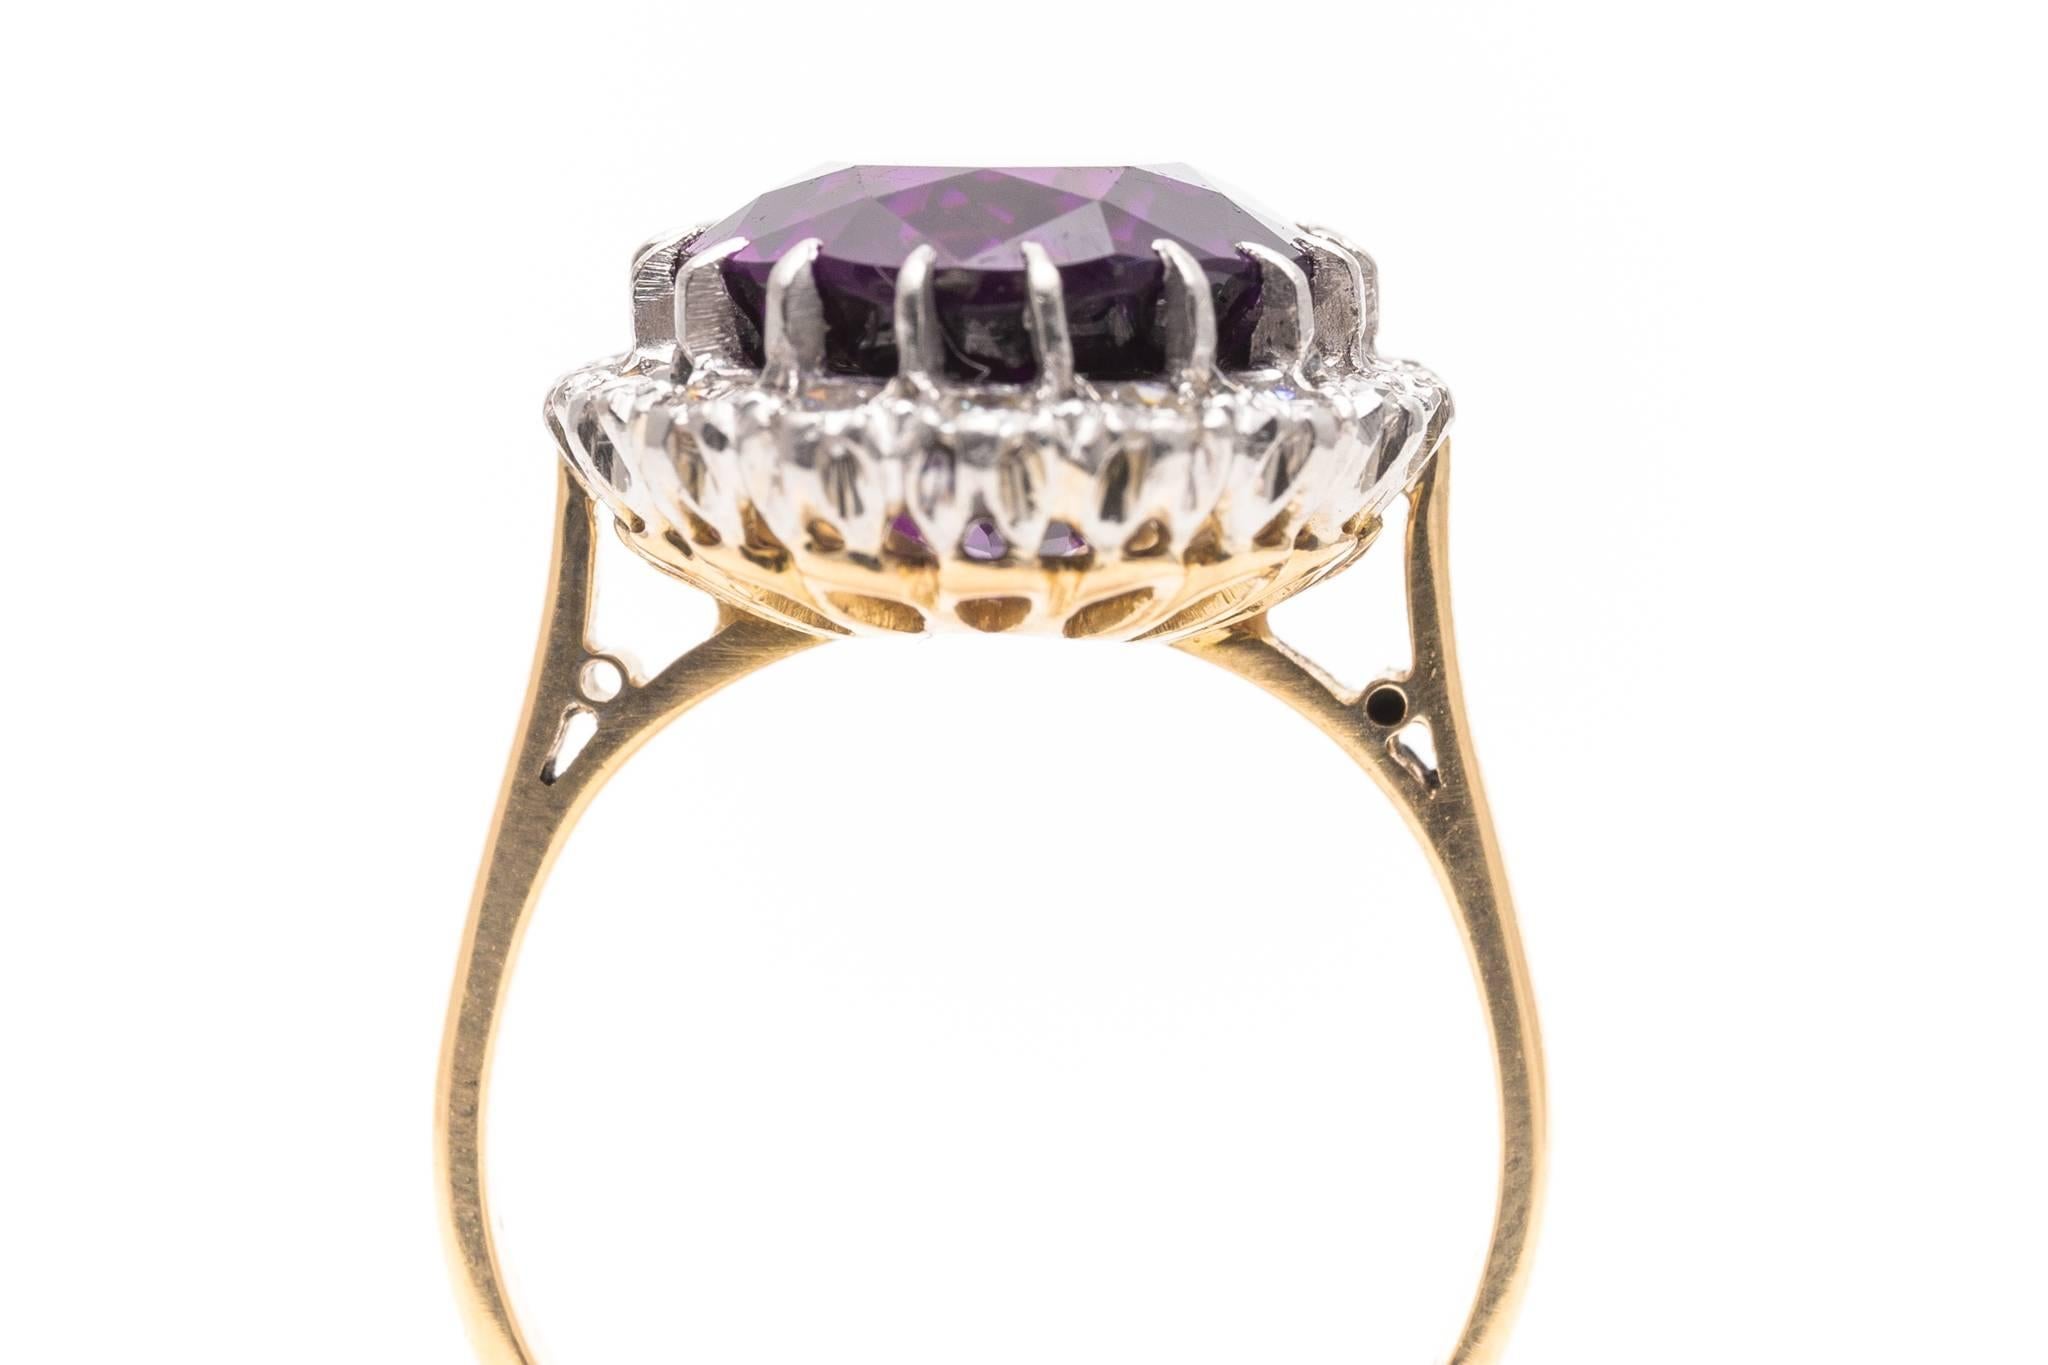 Edwardian Period Amethyst Diamond Cluster Ring in Platinum and 18k 1